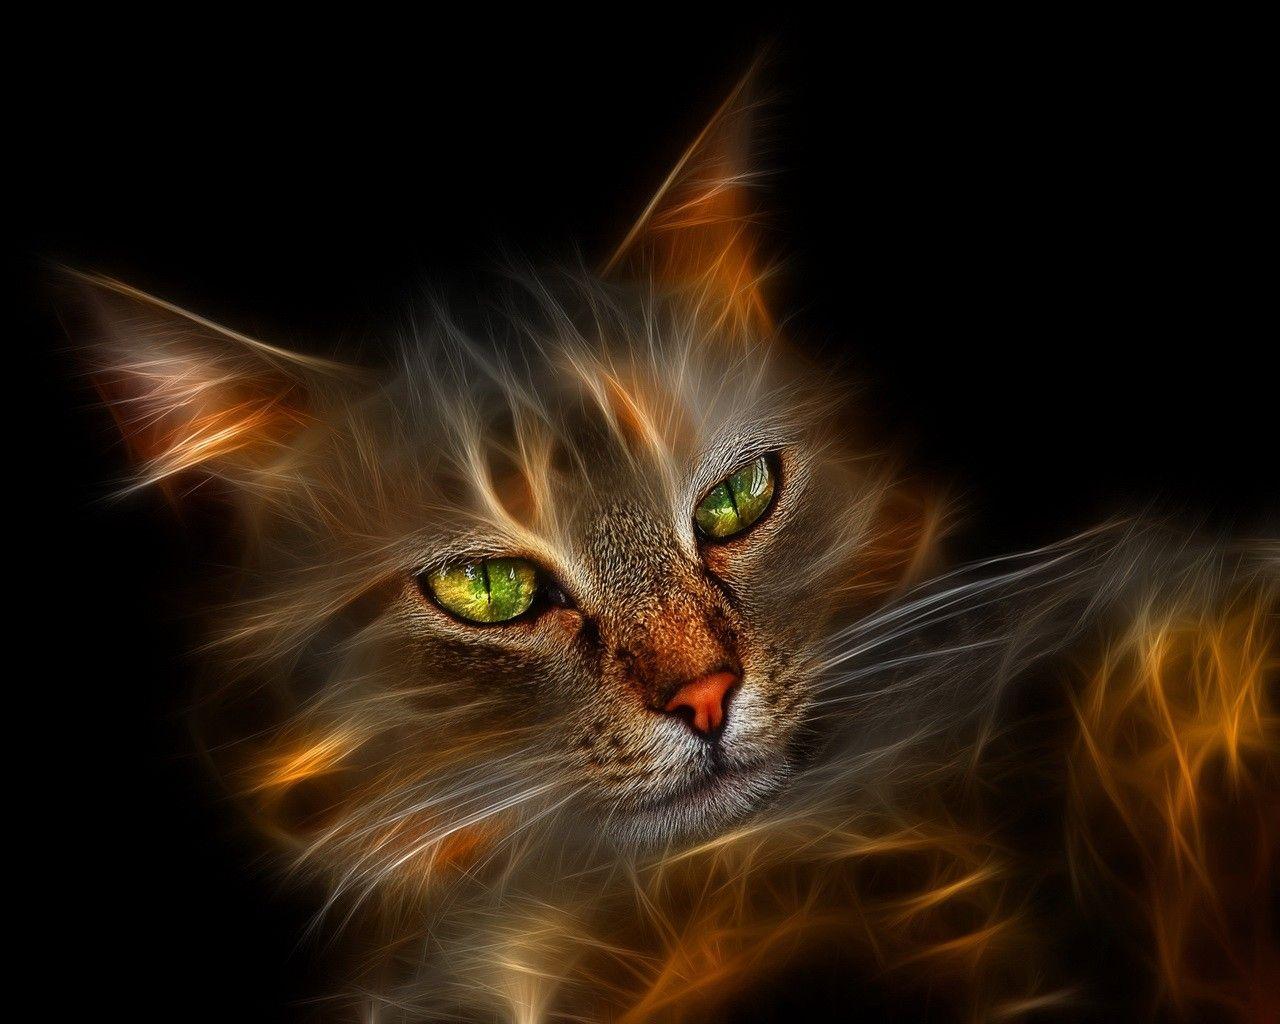 Cool Cat Wallpapers 5656 Wallpapers – 1600×1000 High Definition